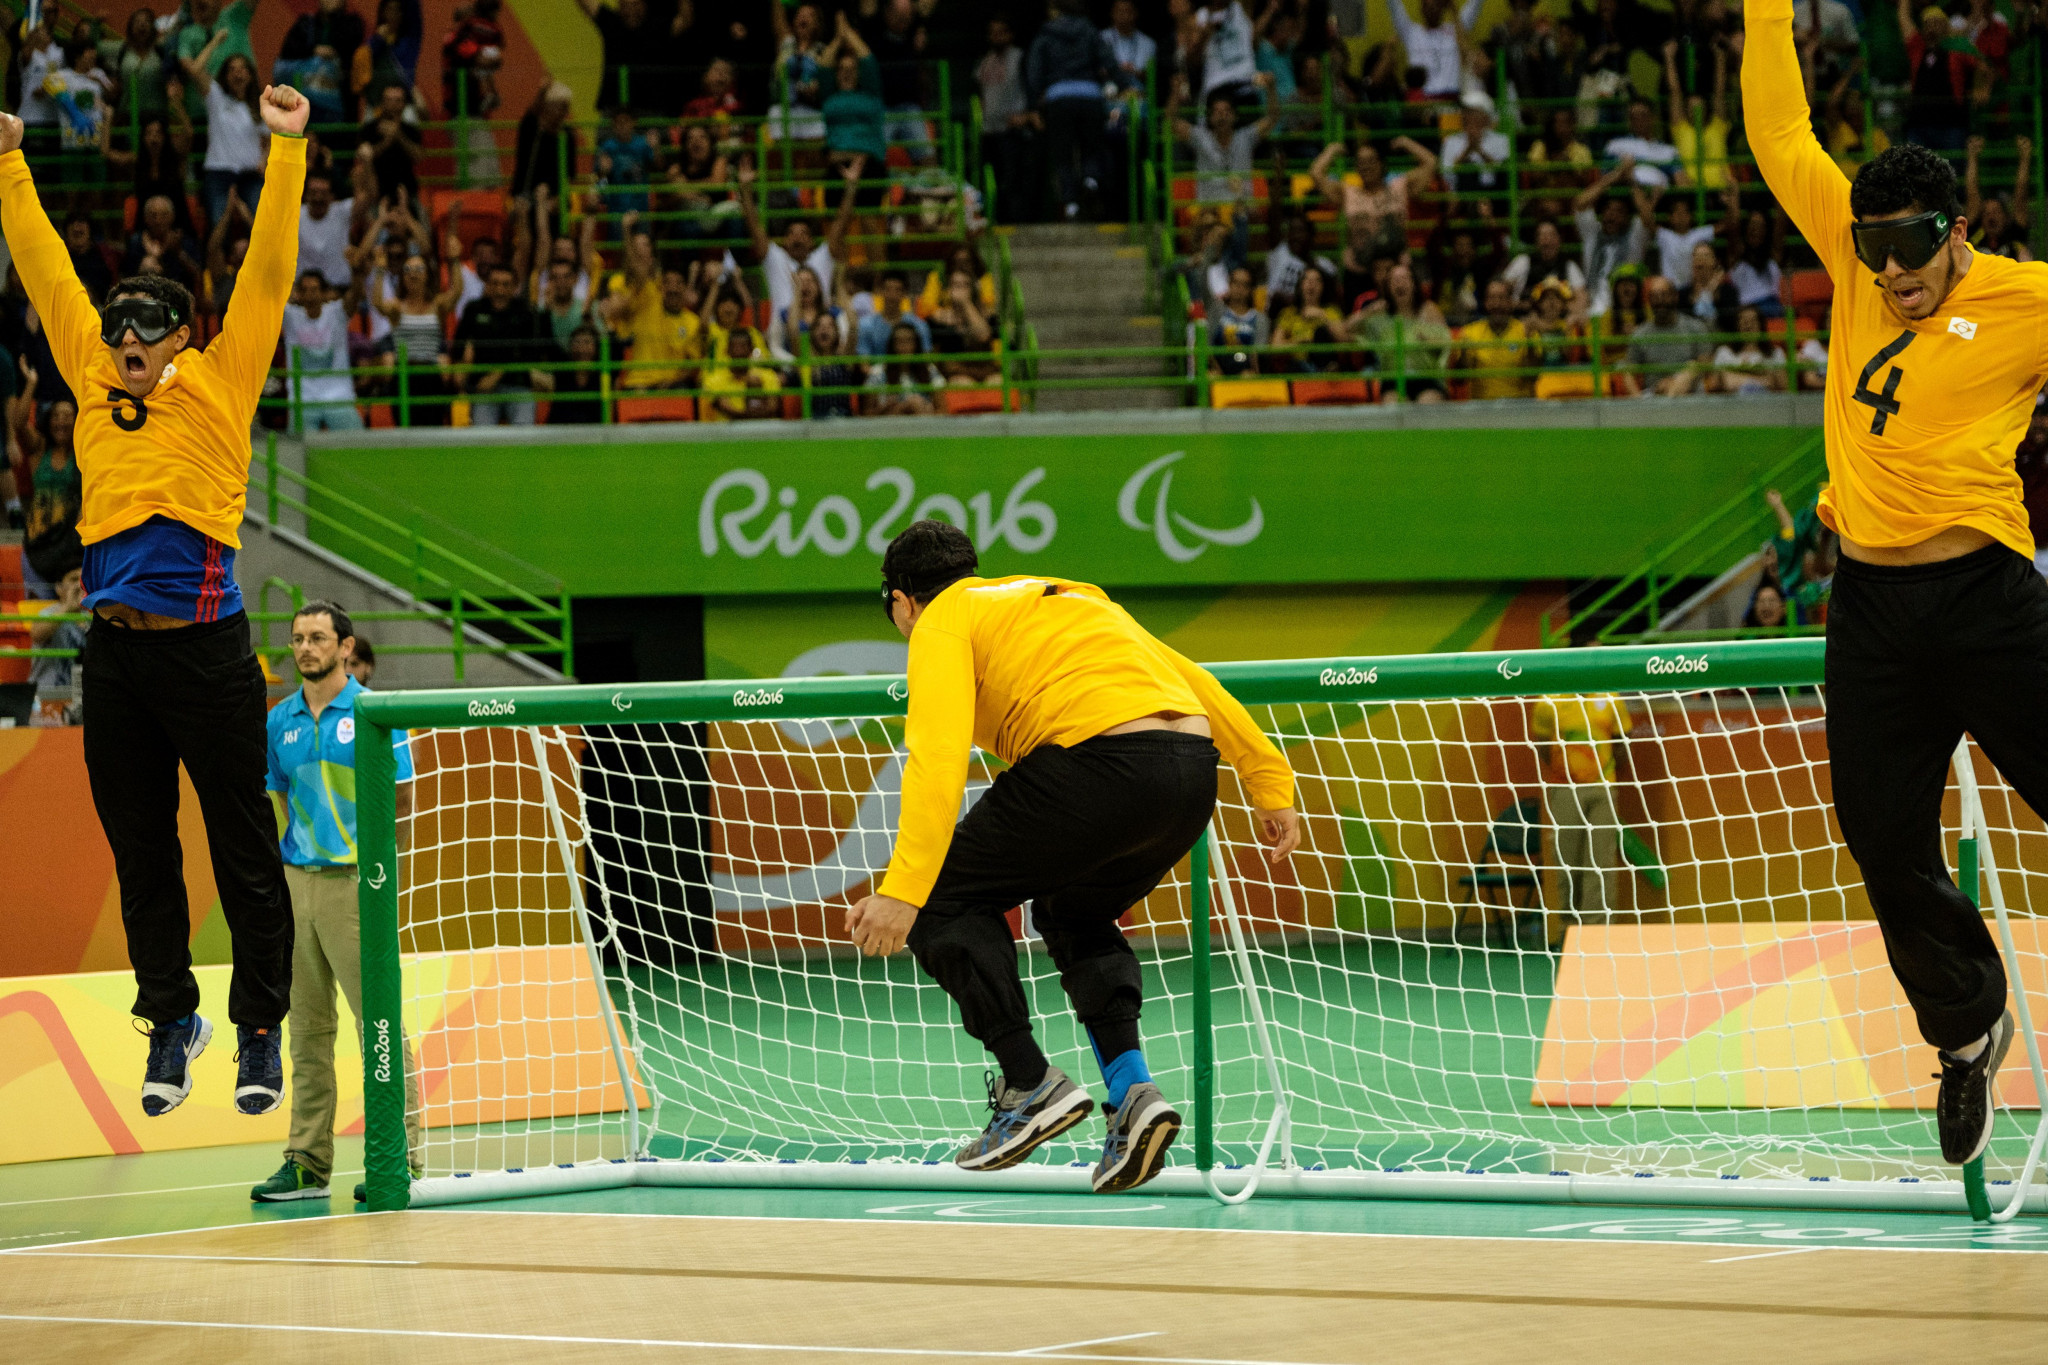 IBSA Goalball Committee regional representative Carla Da Mata claimed the Rio 2016 Paralympic Games helped the development of goalball in the Americas ©Getty Images